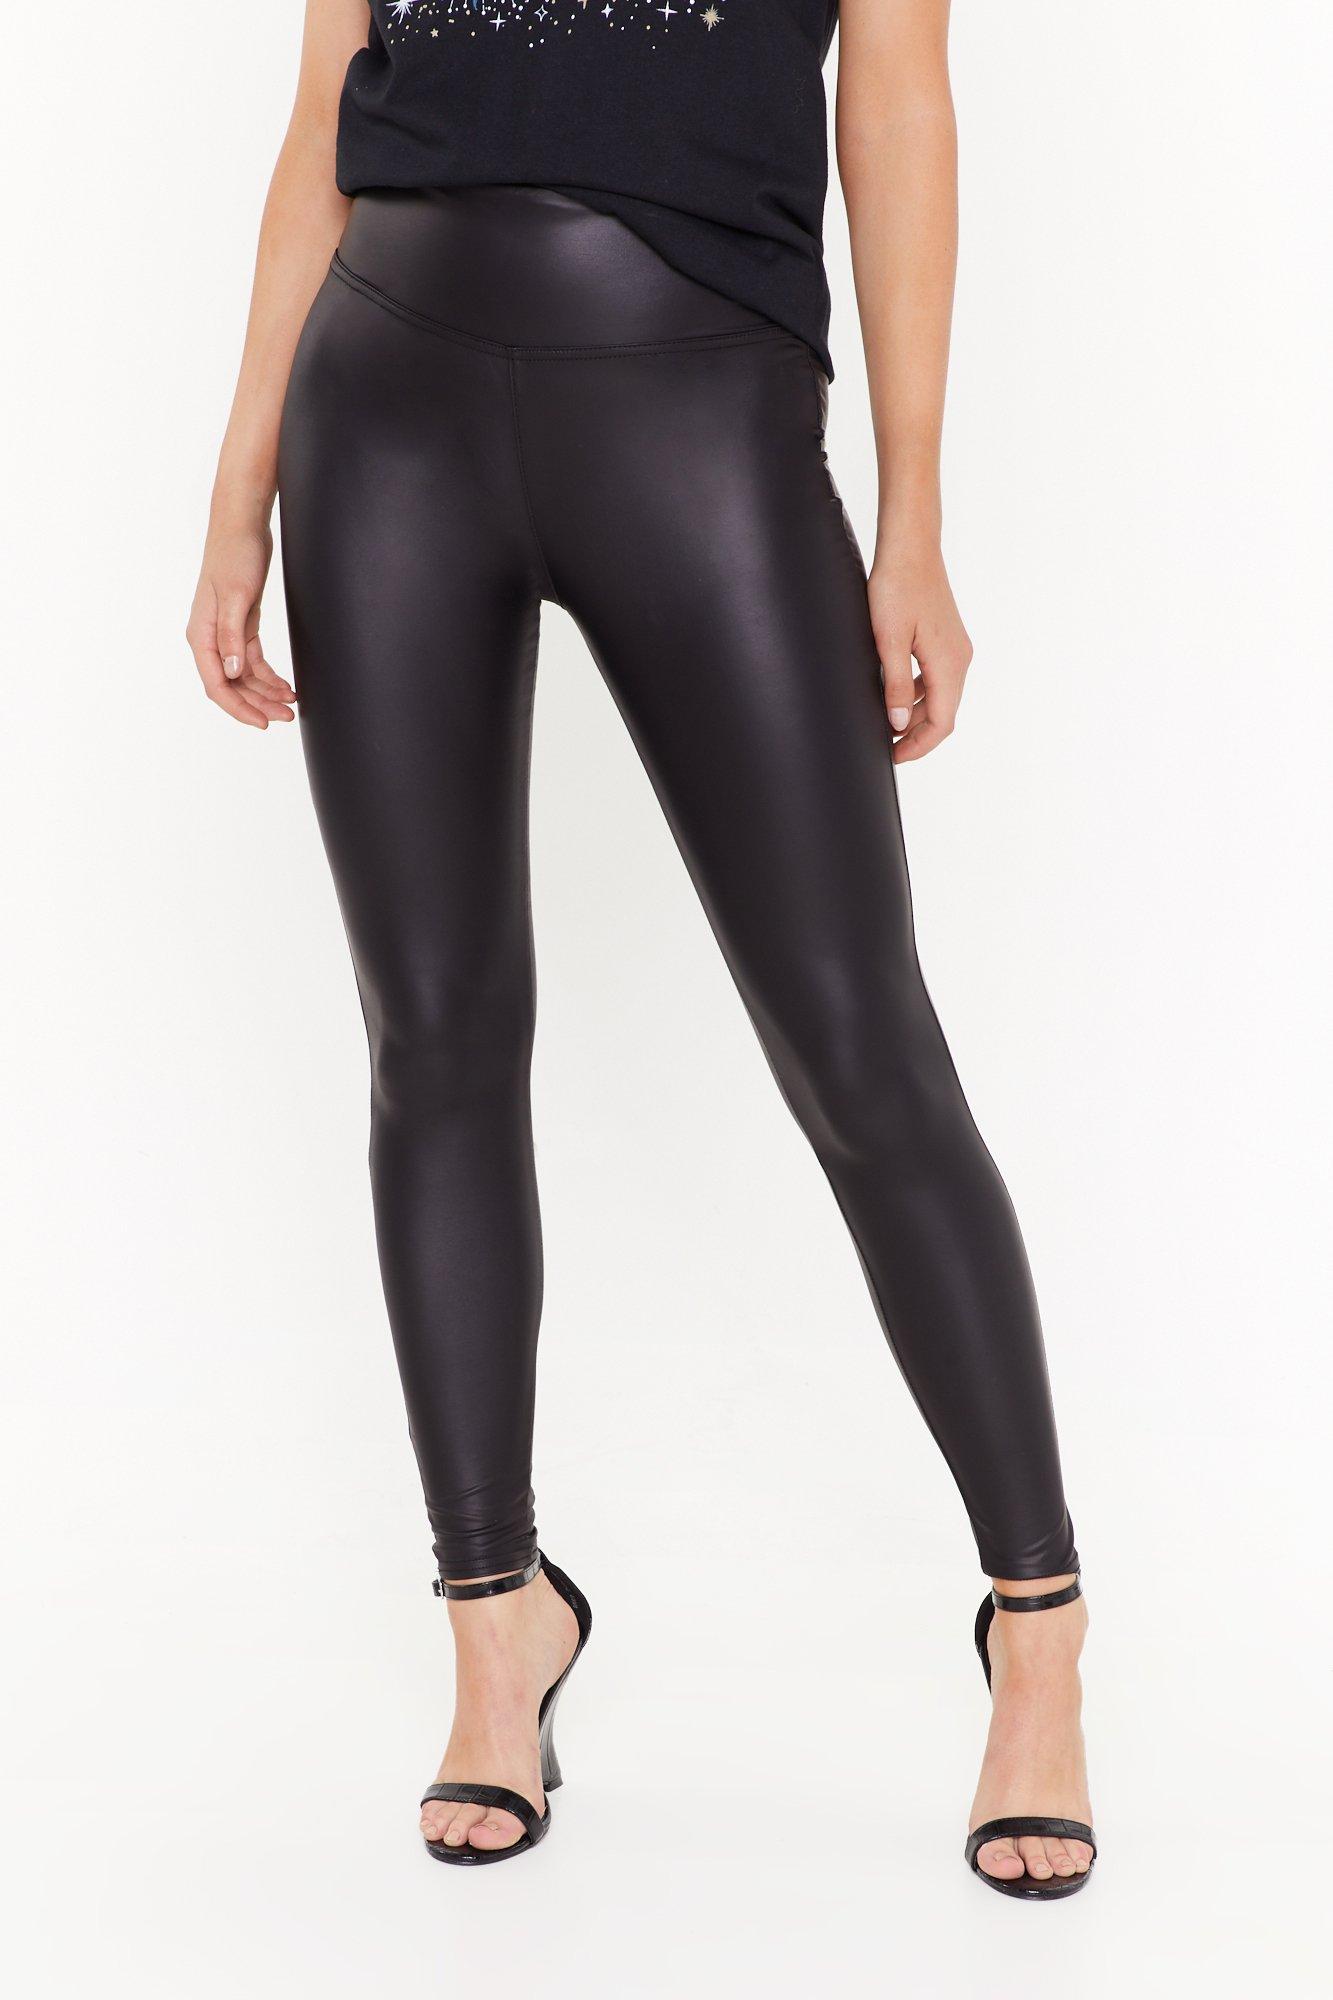 Passing Time Black Faux Leather Leggings